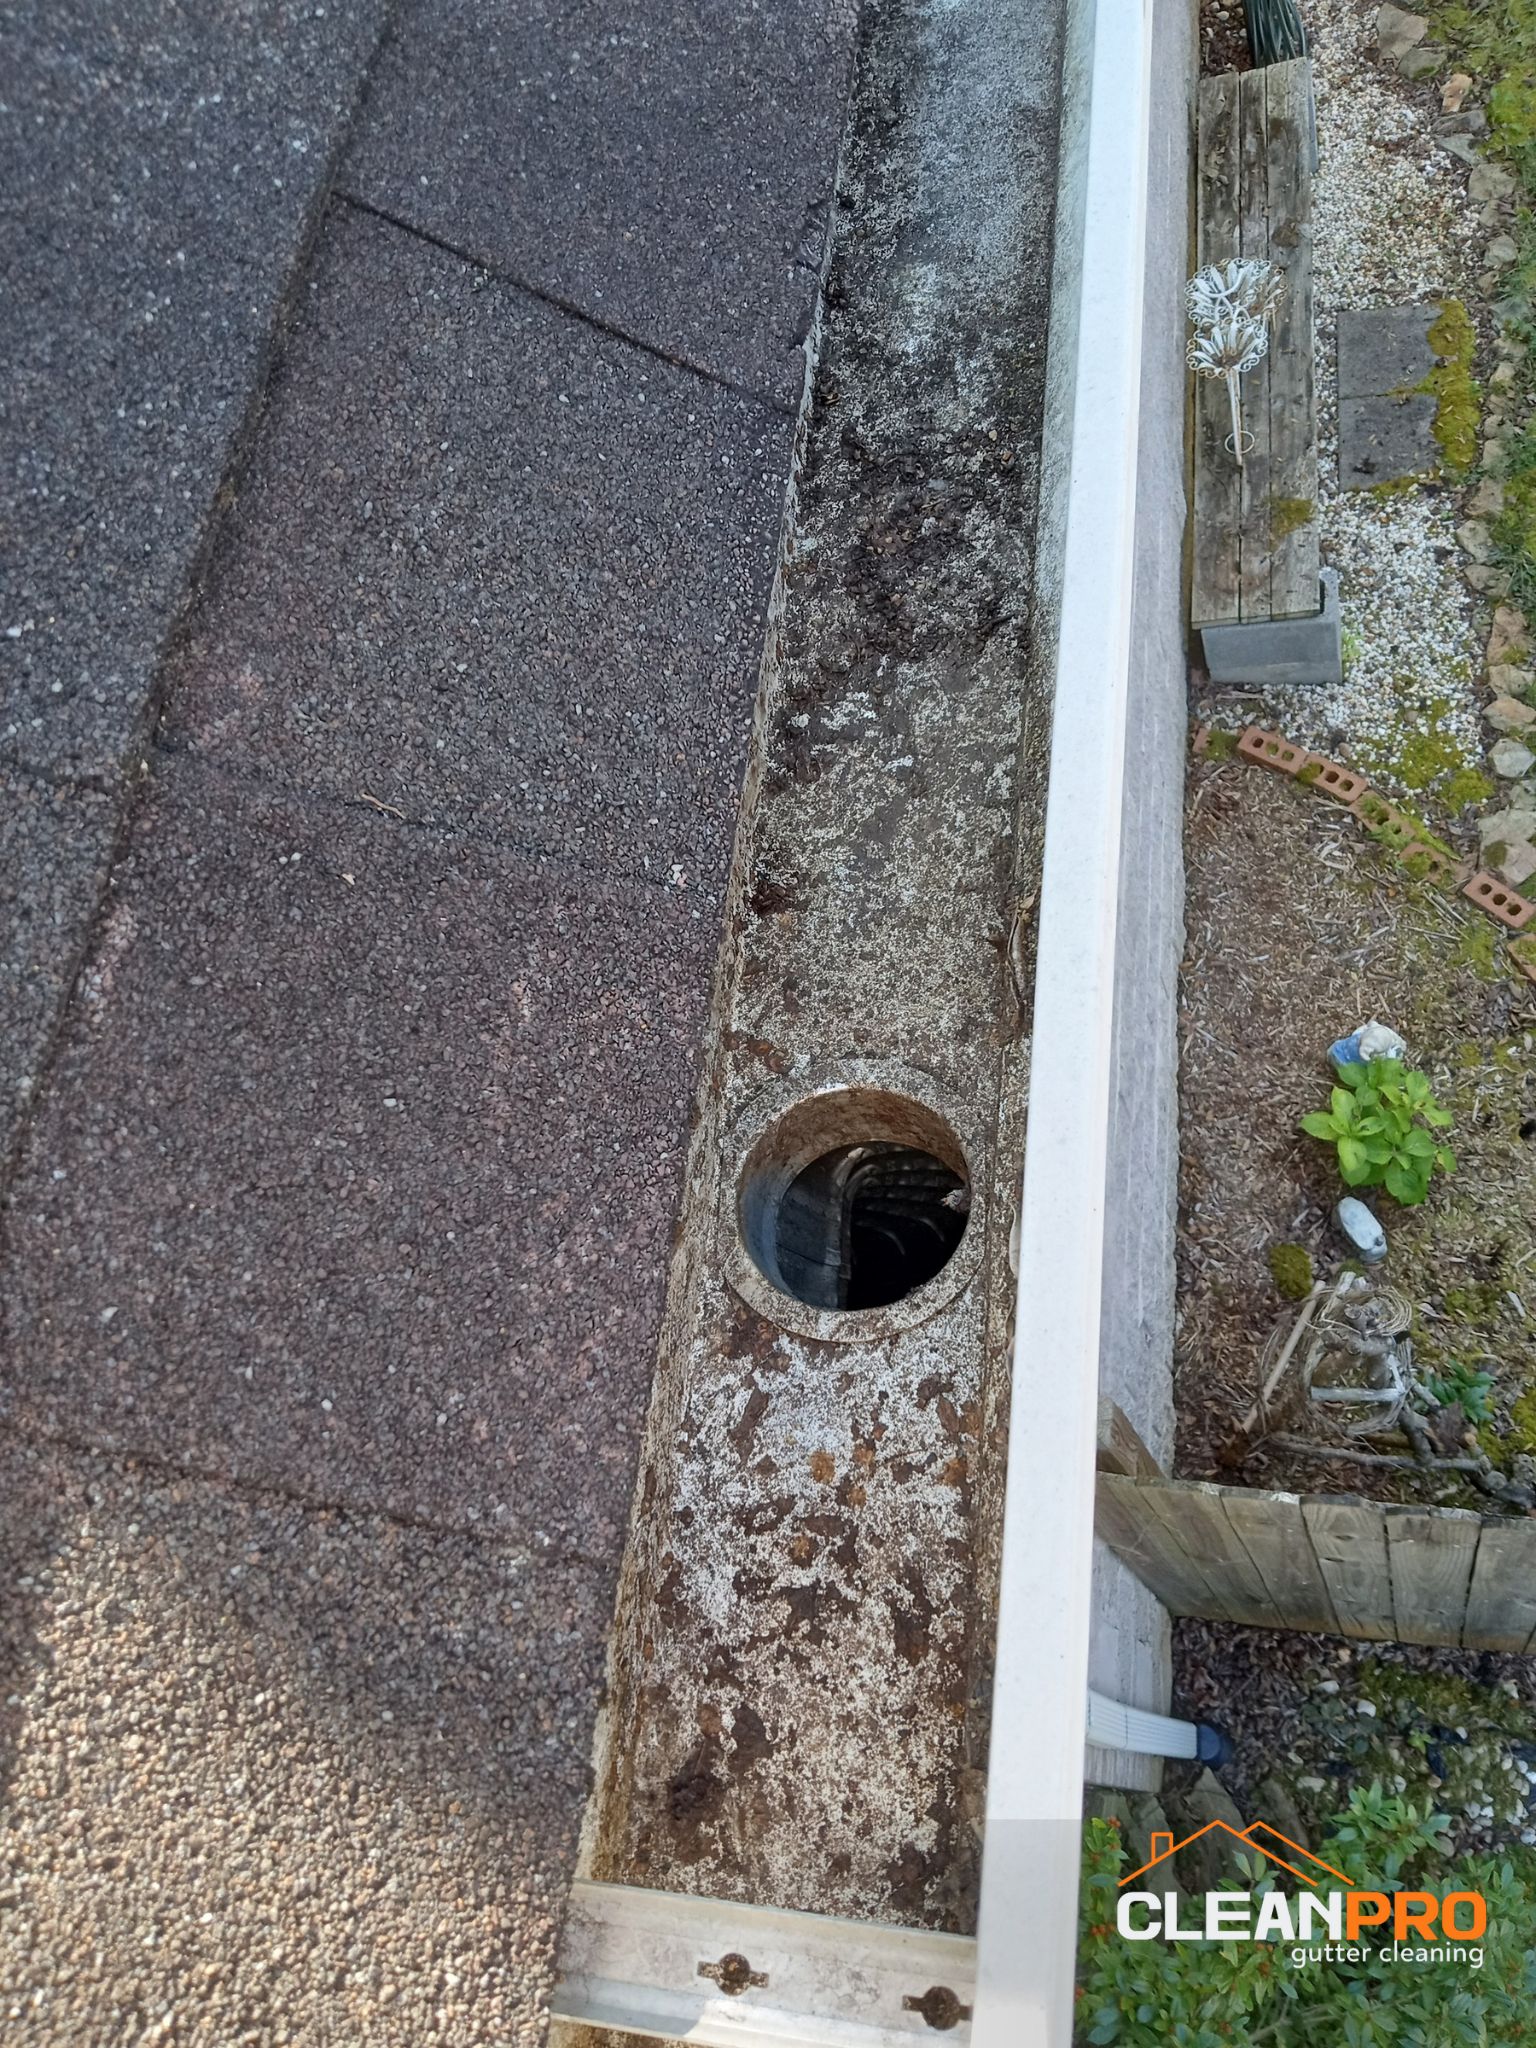 Quality Gutter Cleaning in Overland Park KS